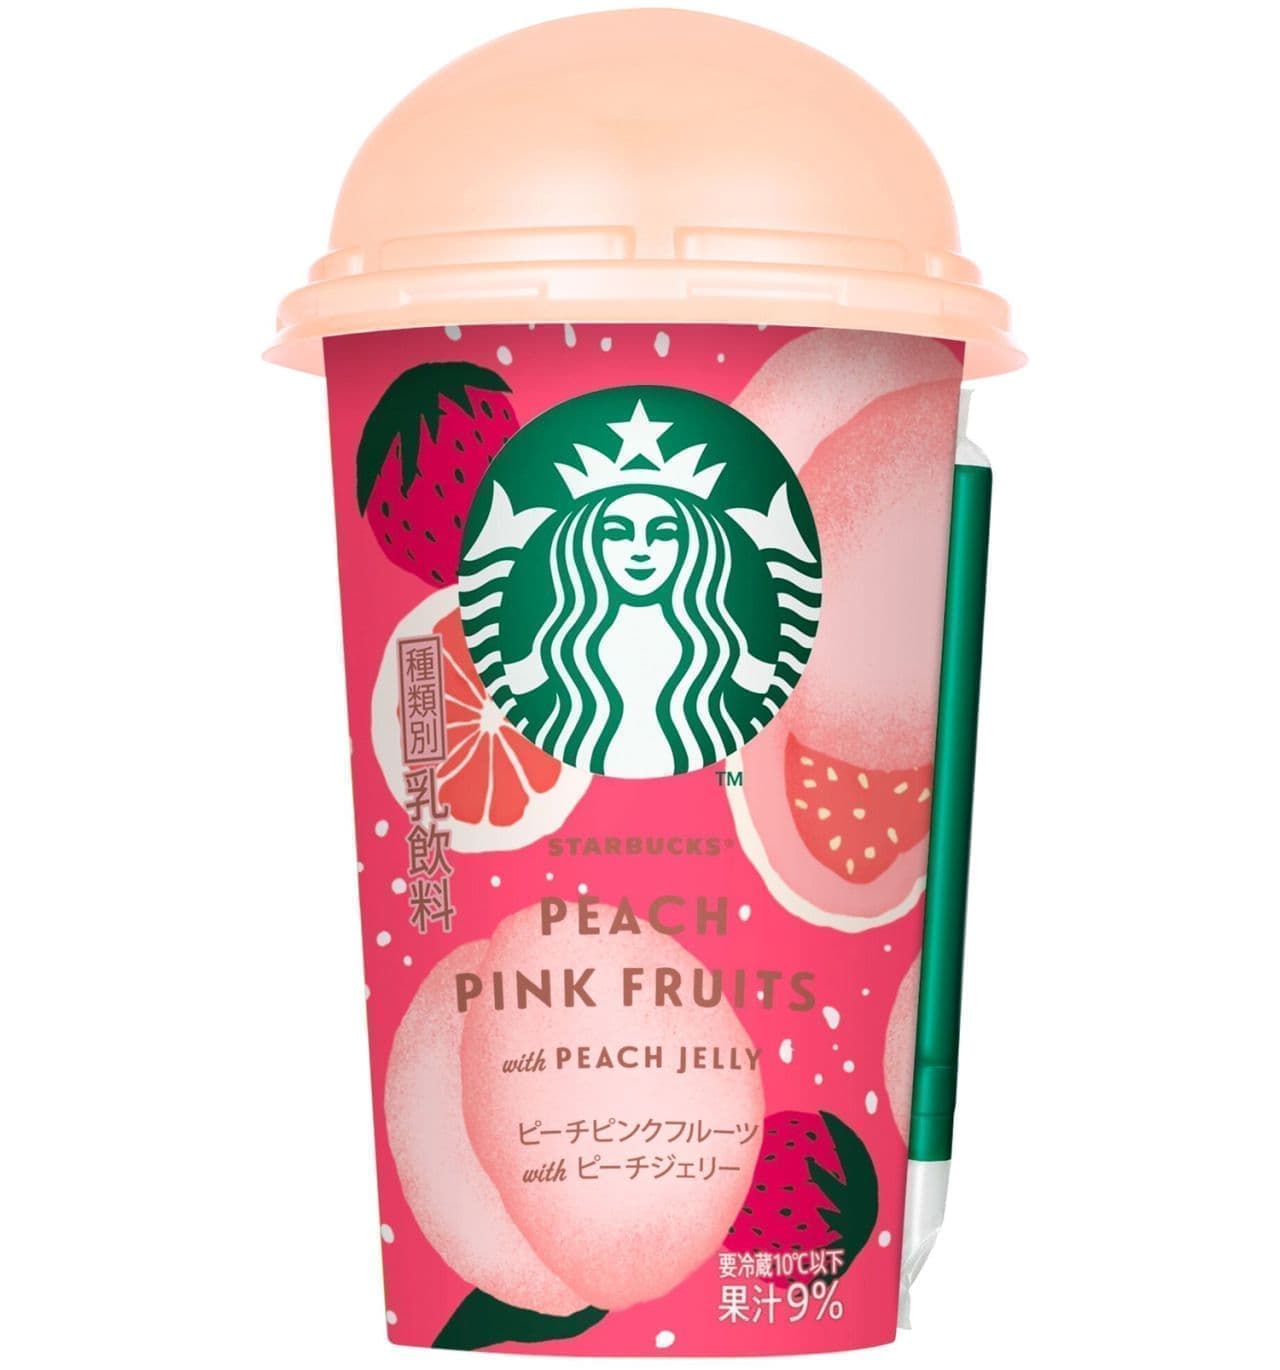 Starbucks Peach Pink Fruit with Peach Jerry